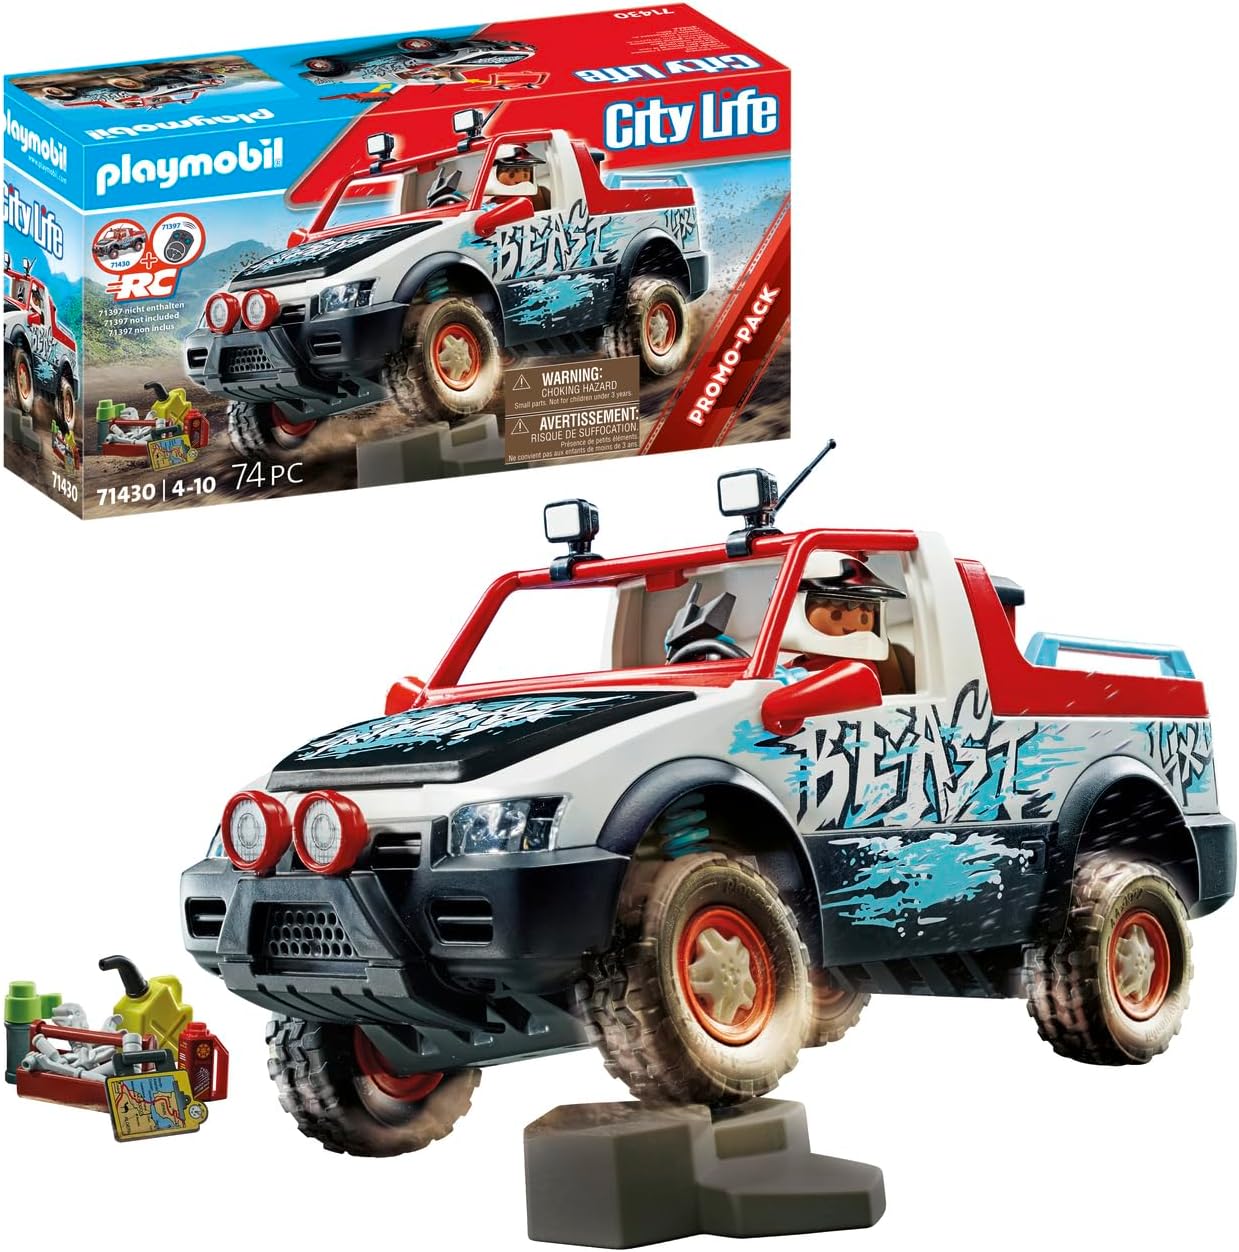 PLAYMOBIL City Life 71430 RC Vehicles Rally Car, Off-Road Pickup for Exciting Adventures, with Movable Axle and Extendable Ramp, Toy for Children from 4 Years